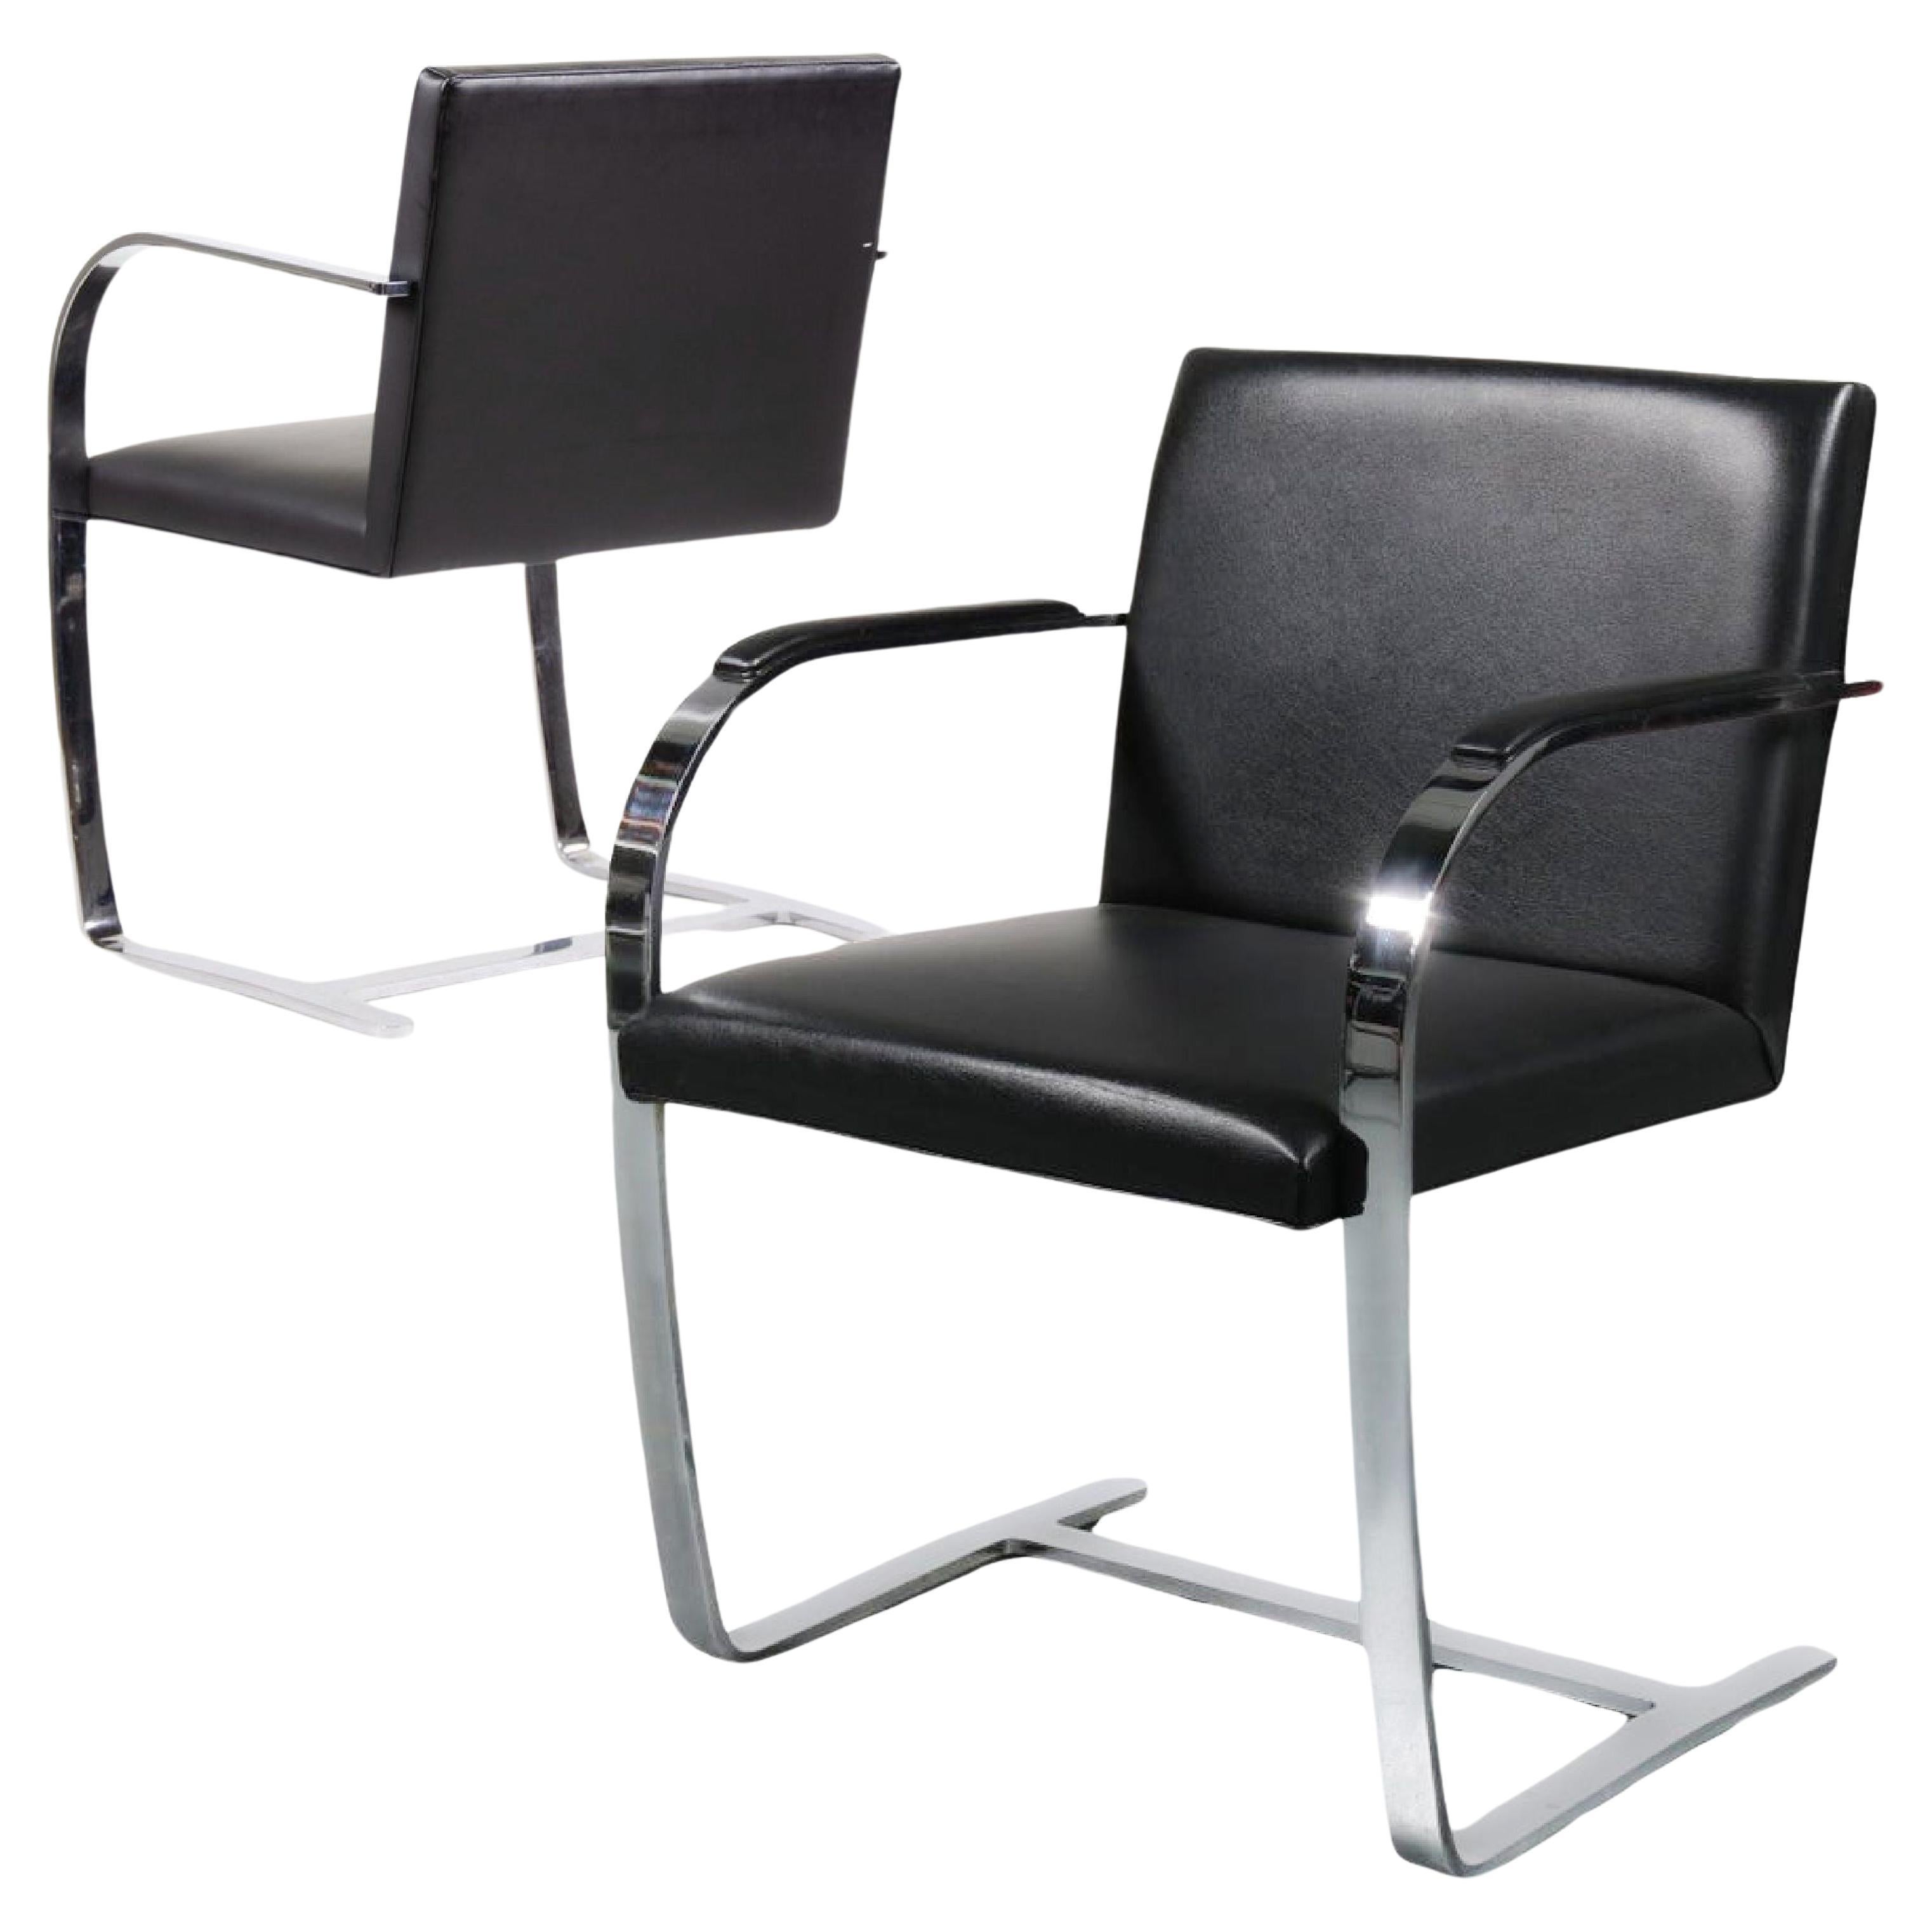 Mies van der Rohe for Knoll Brno Flat Bar Armchair 255AC, Black Leather with armpads (original design).

The Tugendhat House, often considered to be Mies van der Rohe’s defining residential work, is the summation of his ideas incorporated at every